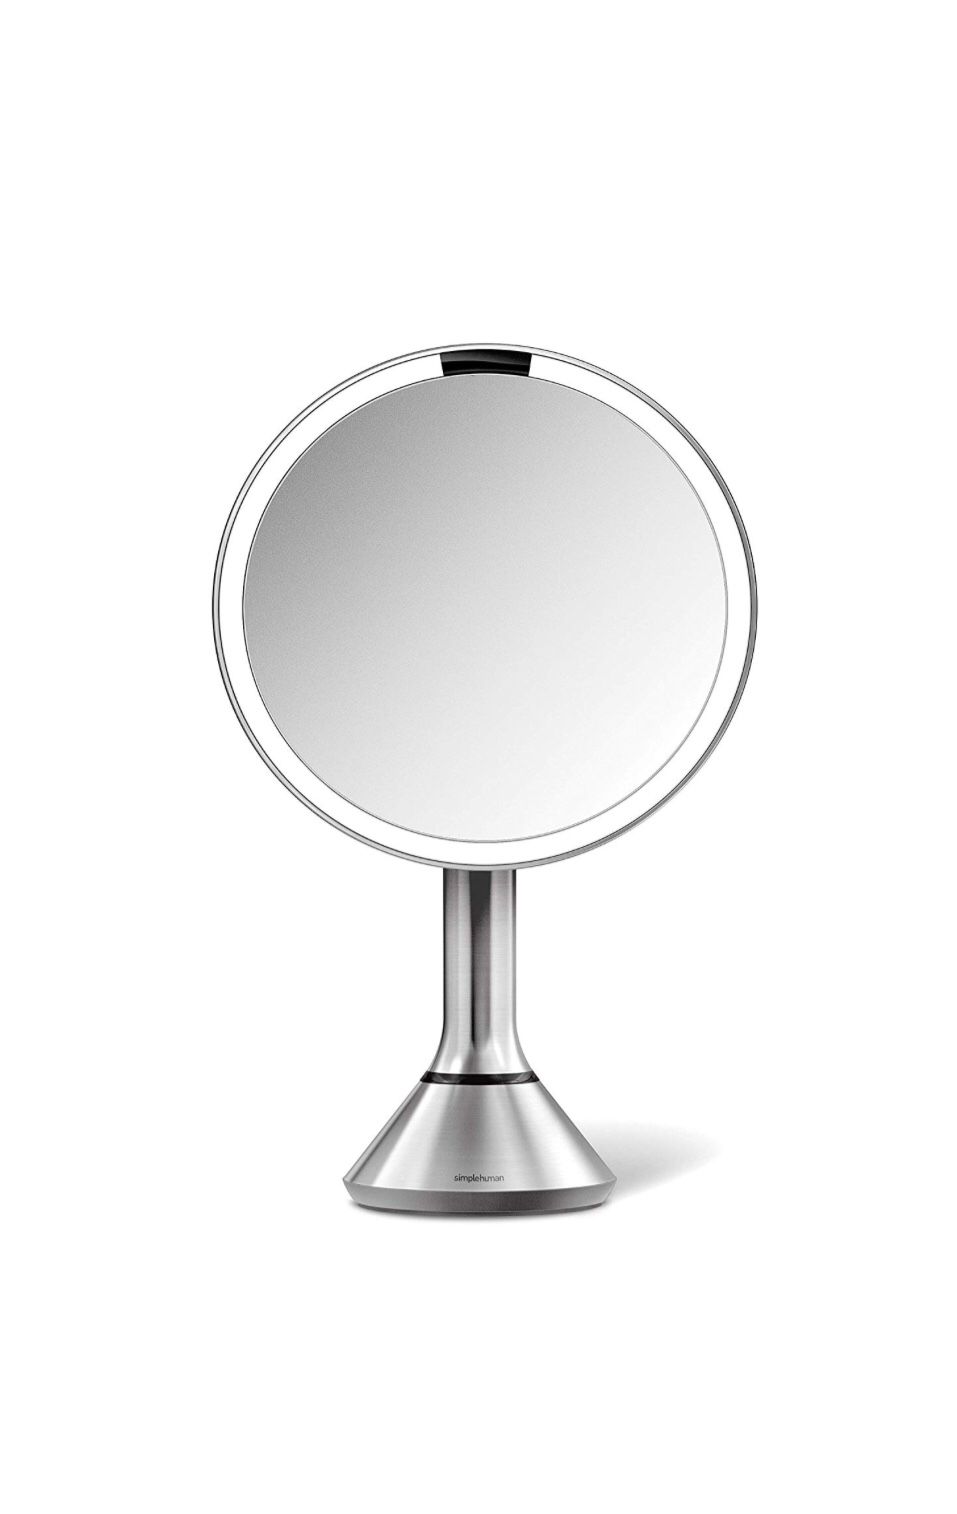 simplehuman Sensor Lighted Makeup Vanity Mirror, 8" Round with Touch-Control Brightness, 5X Magnification, Brushed Stainless Steel, Rechargeable and